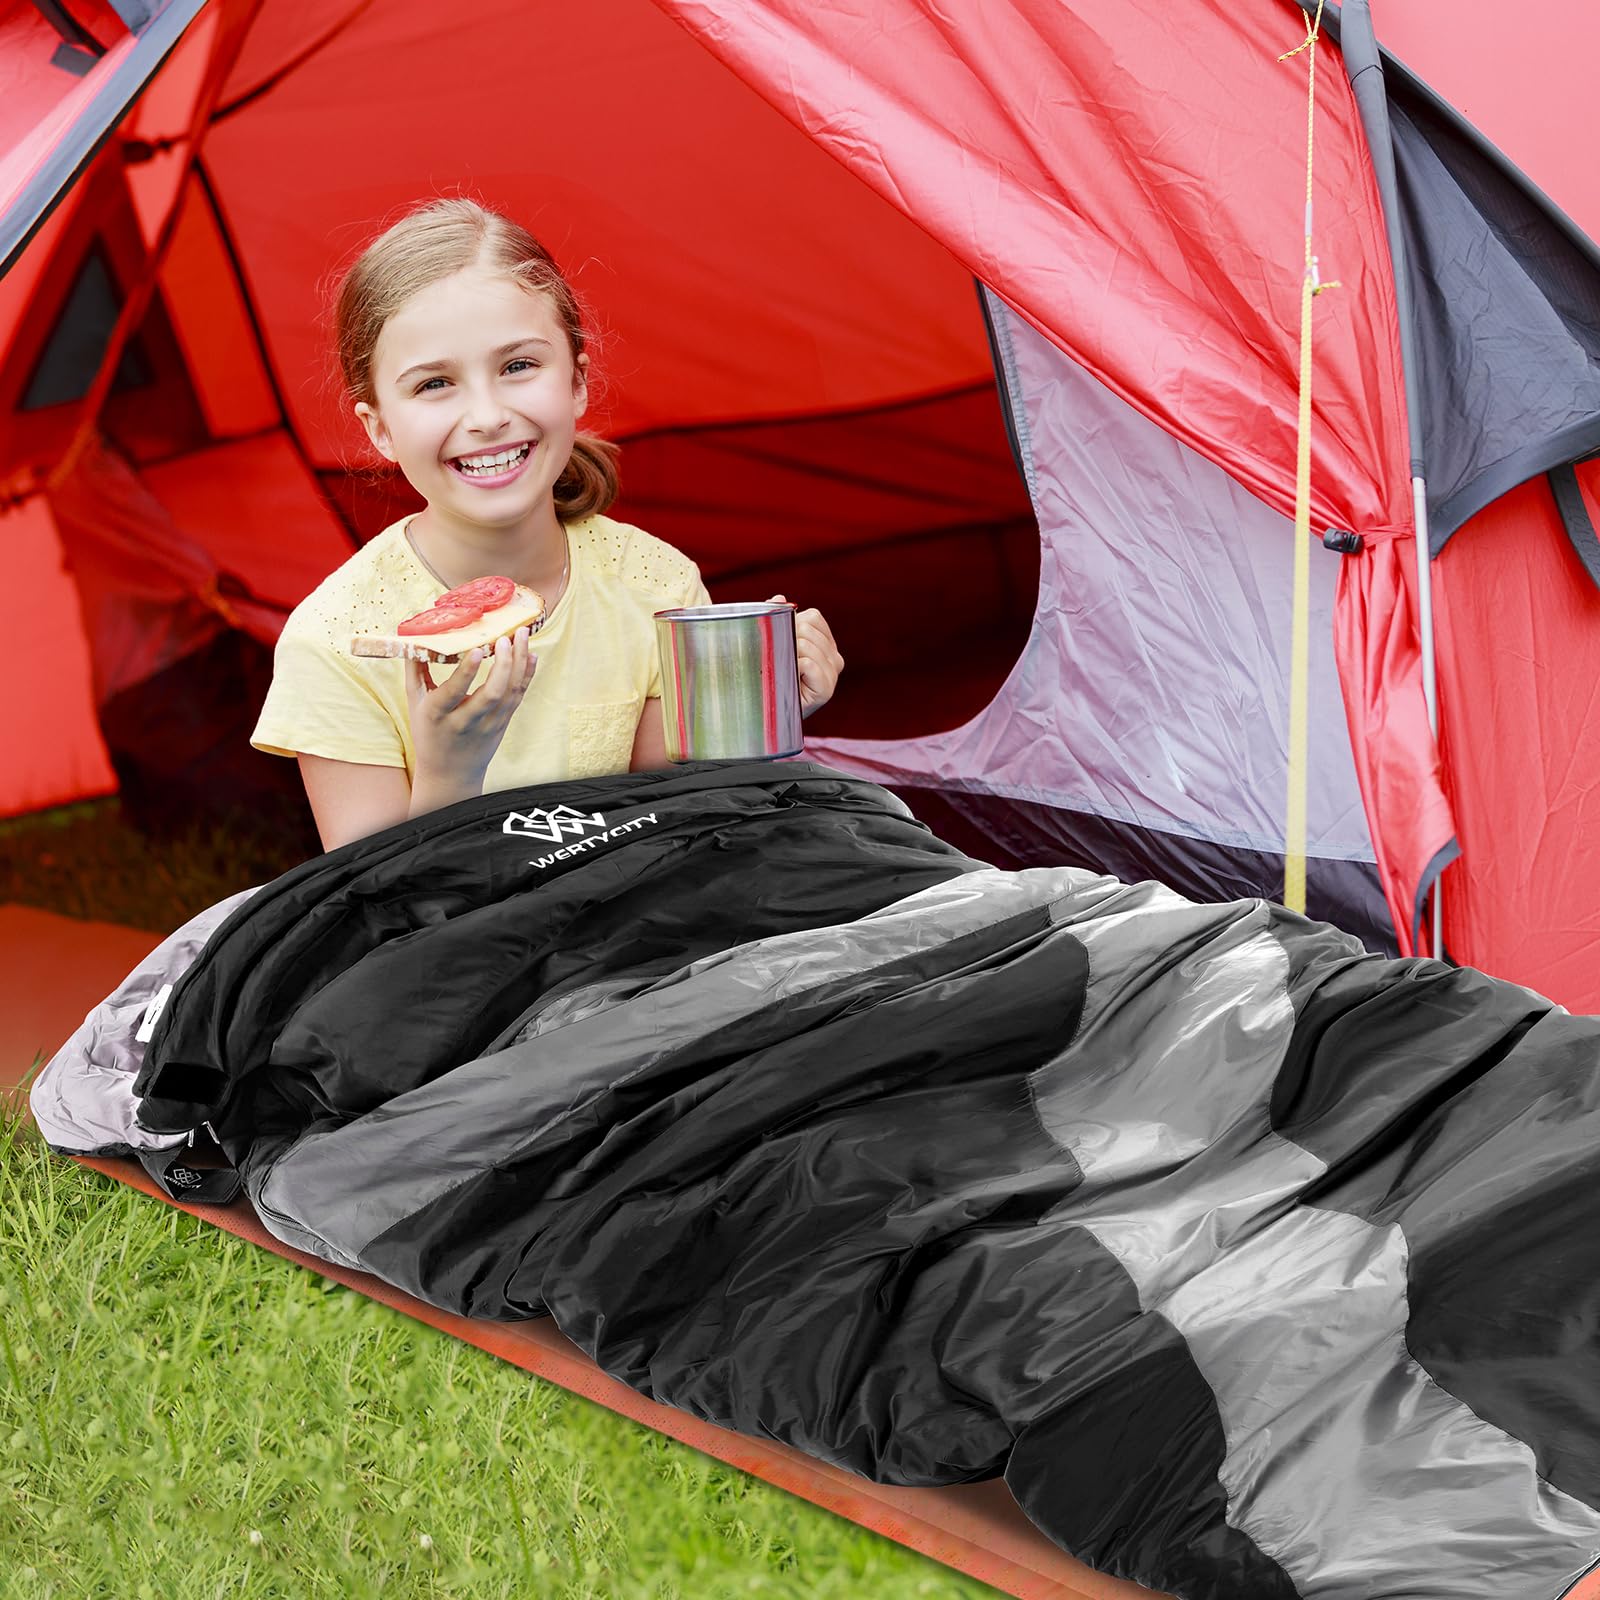 Ultralight Warm Weather Sleeping Bag for Kids Girls Boys Adults, Lightweight Portable Waterproof Comfort with Compression Sack, Great for 3 Season Camping, Backpacking, Traveling, Hiking(Black)